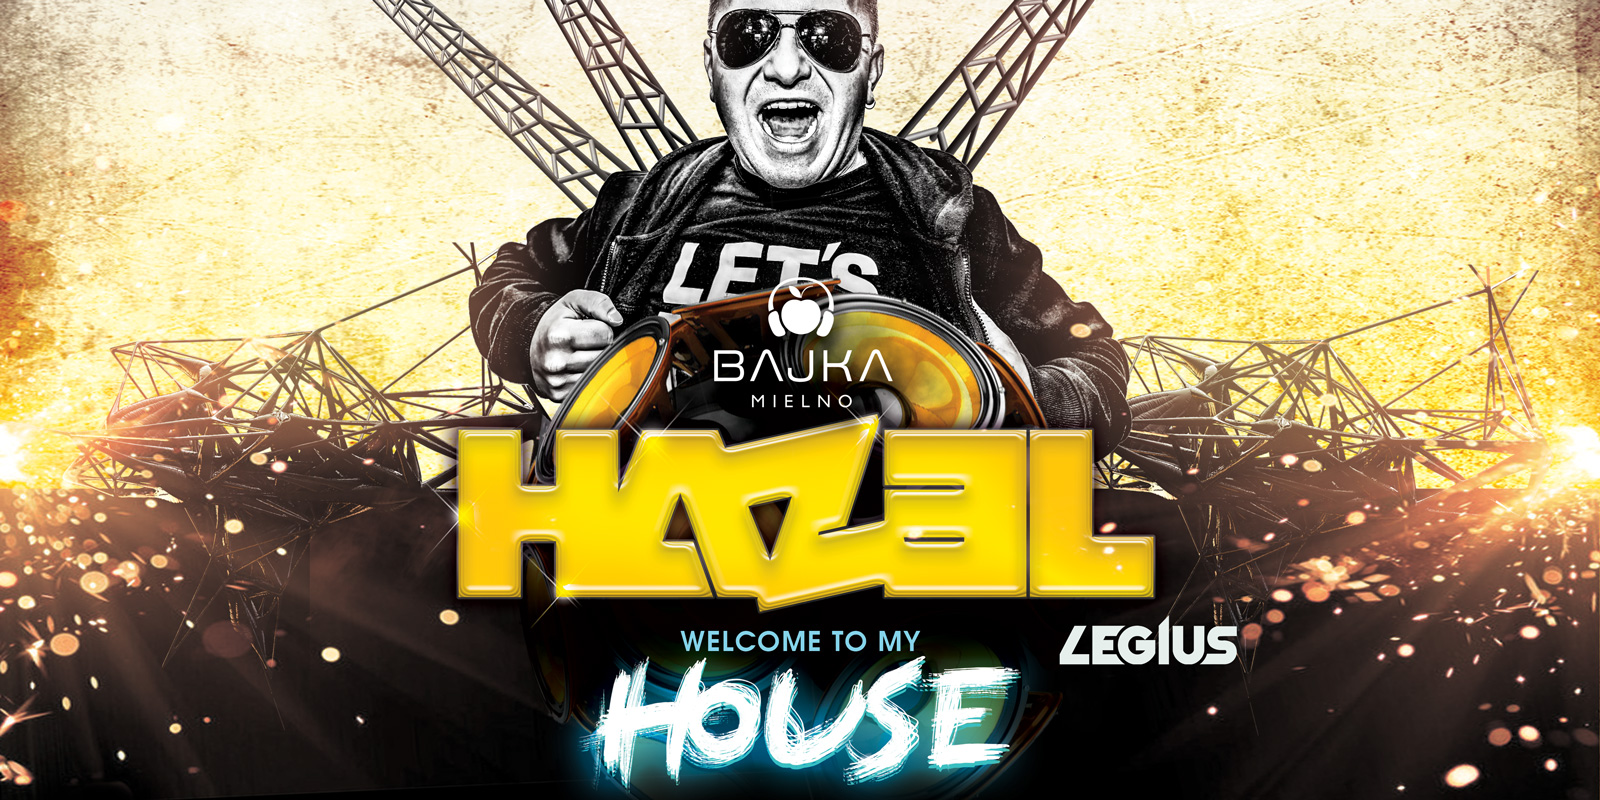 Hazel – Welcome to my House / Warsaw Shore